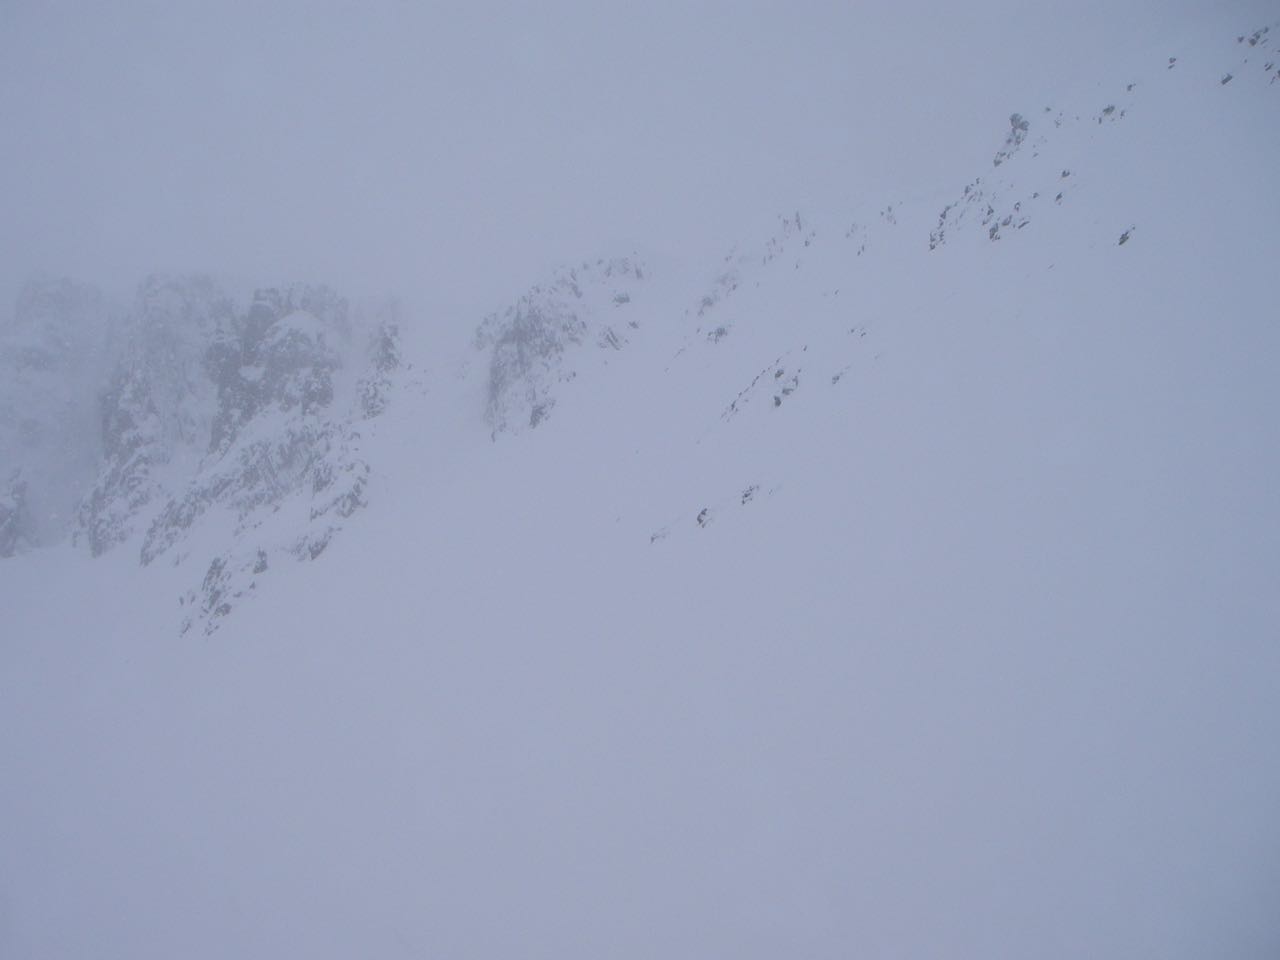 The lower part of the rim of the corrie - hard to see how much of a cornice has developed through the mirk